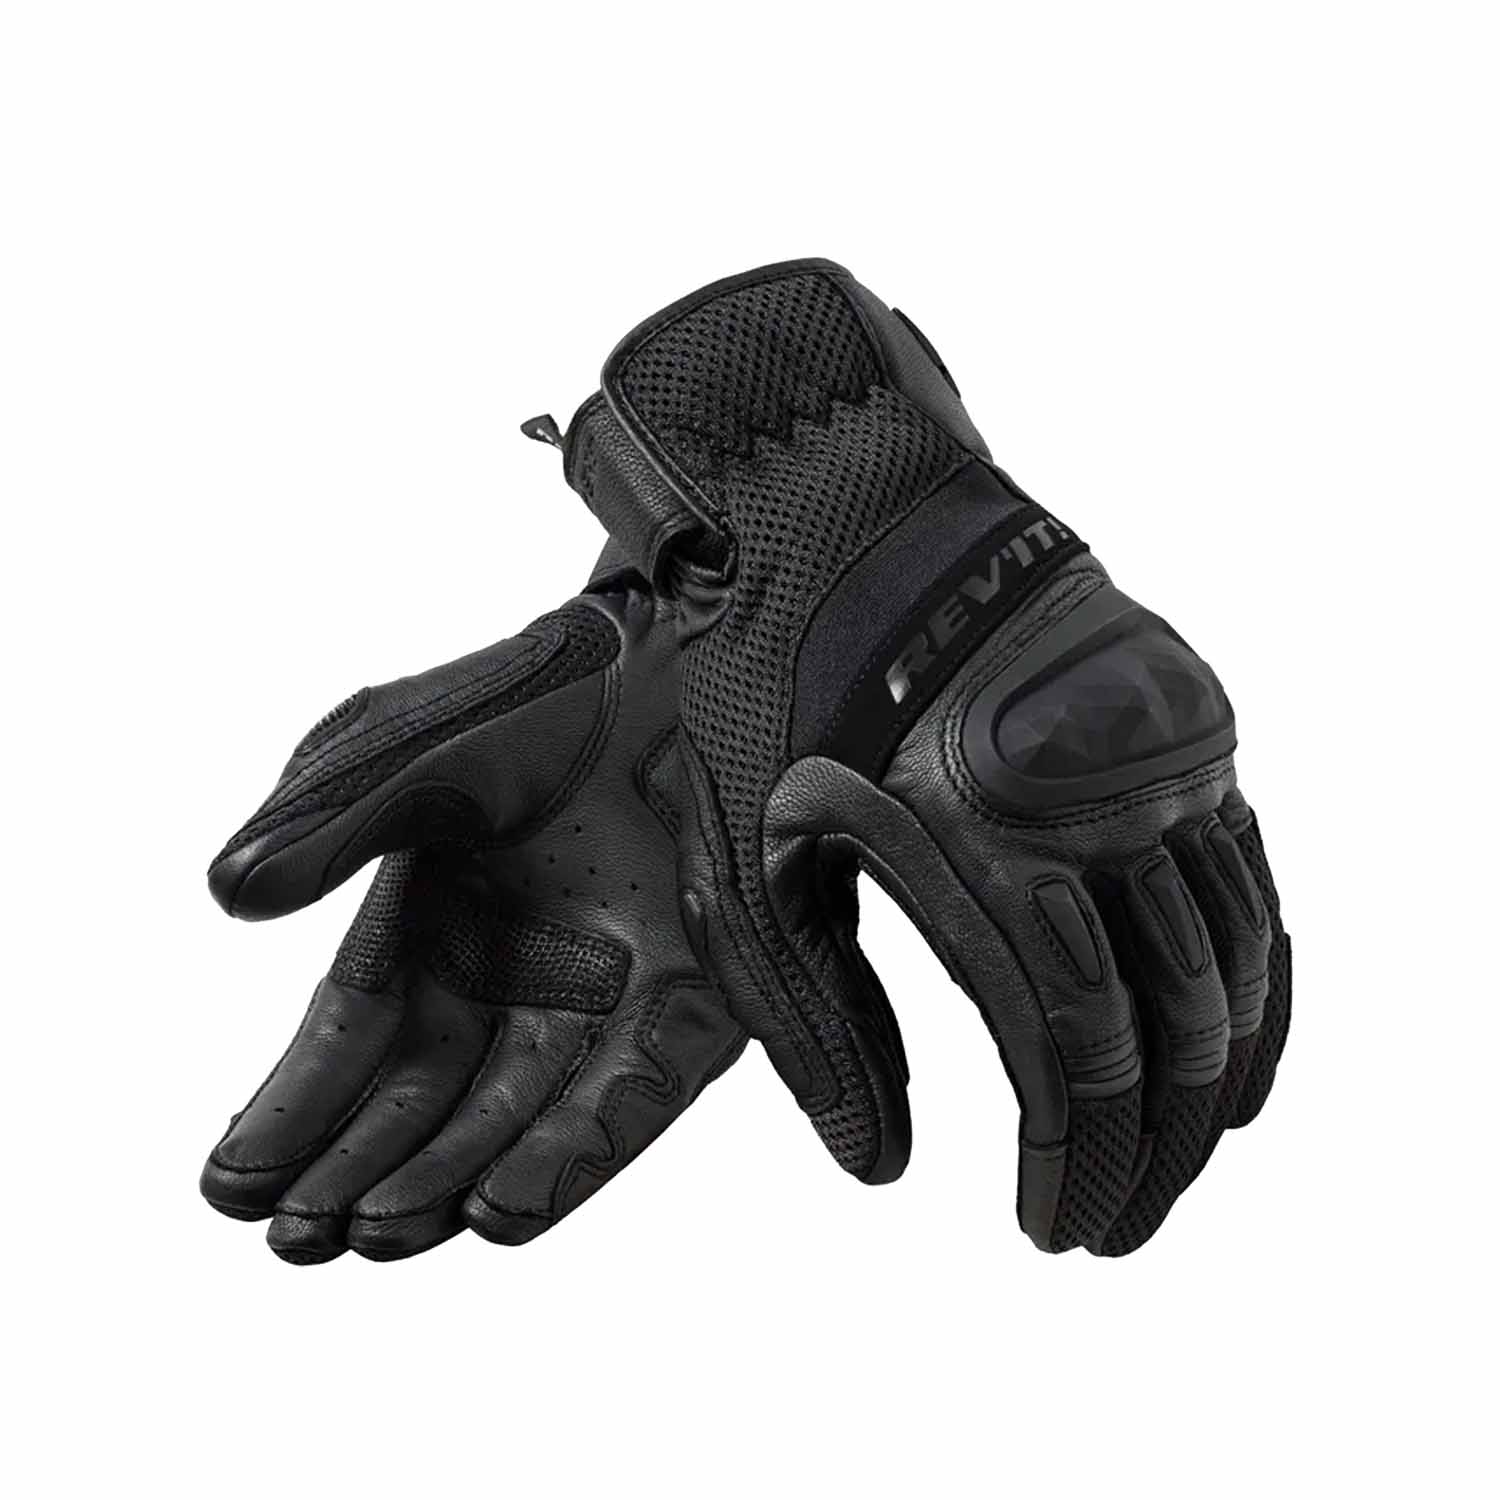 Image of REV'IT! Dirt 4 Gloves Black Size 2XL ID 8700001383424